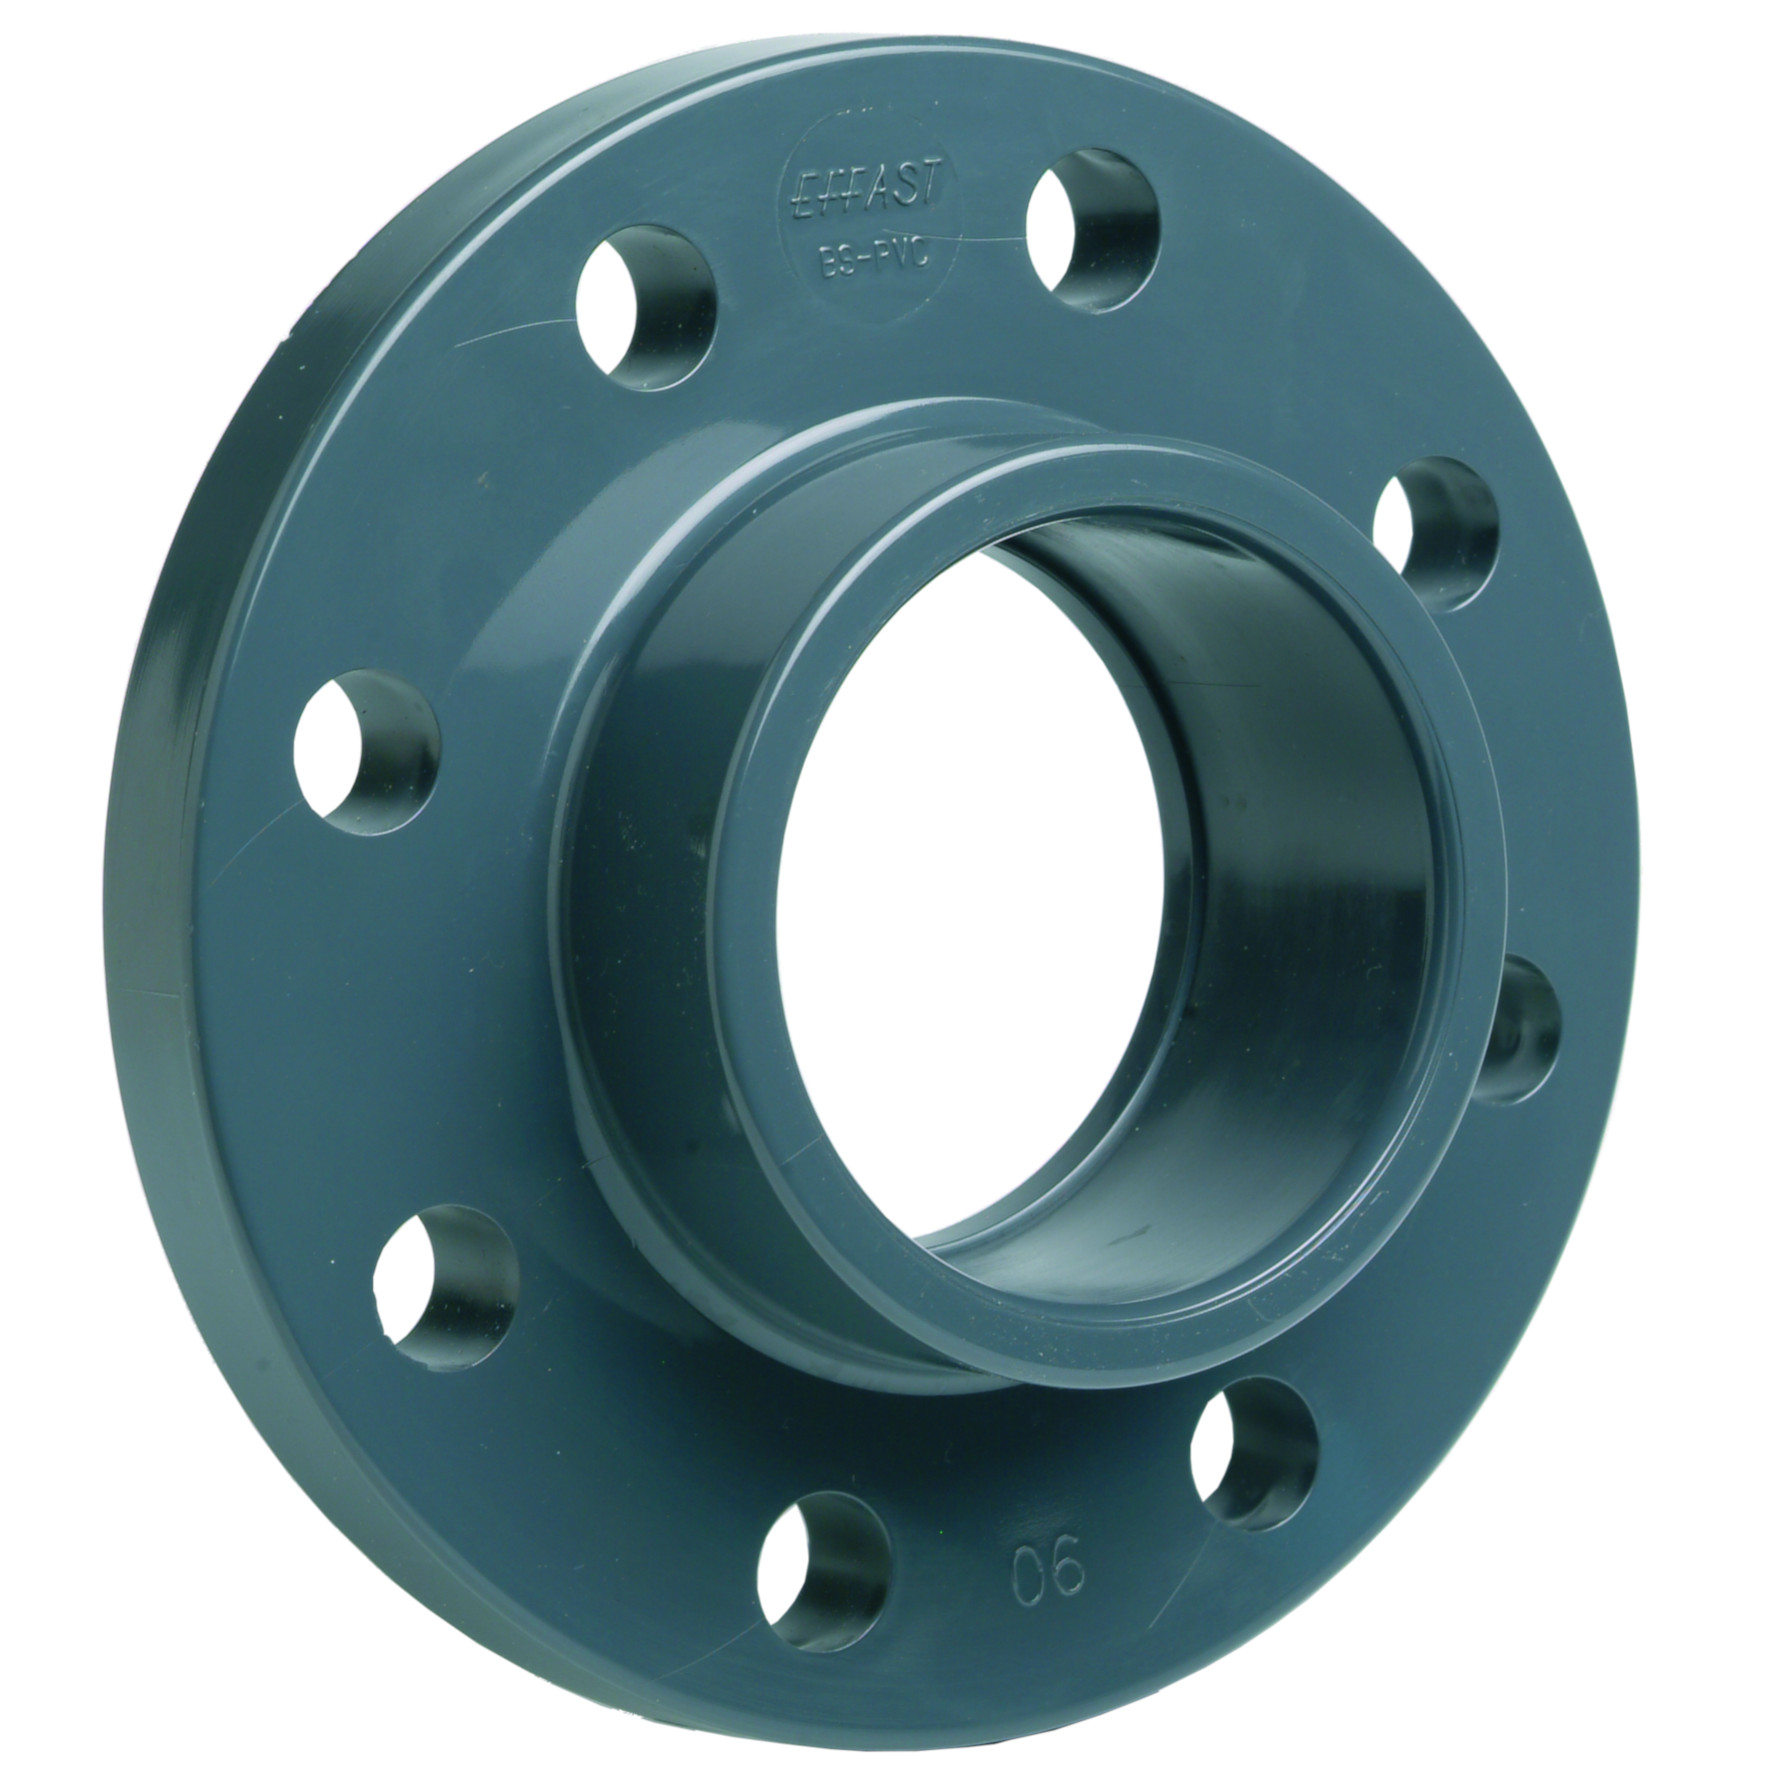 PVC-U fixed flange BS 10 table D/E - EFFAST - 100% Made in Italy